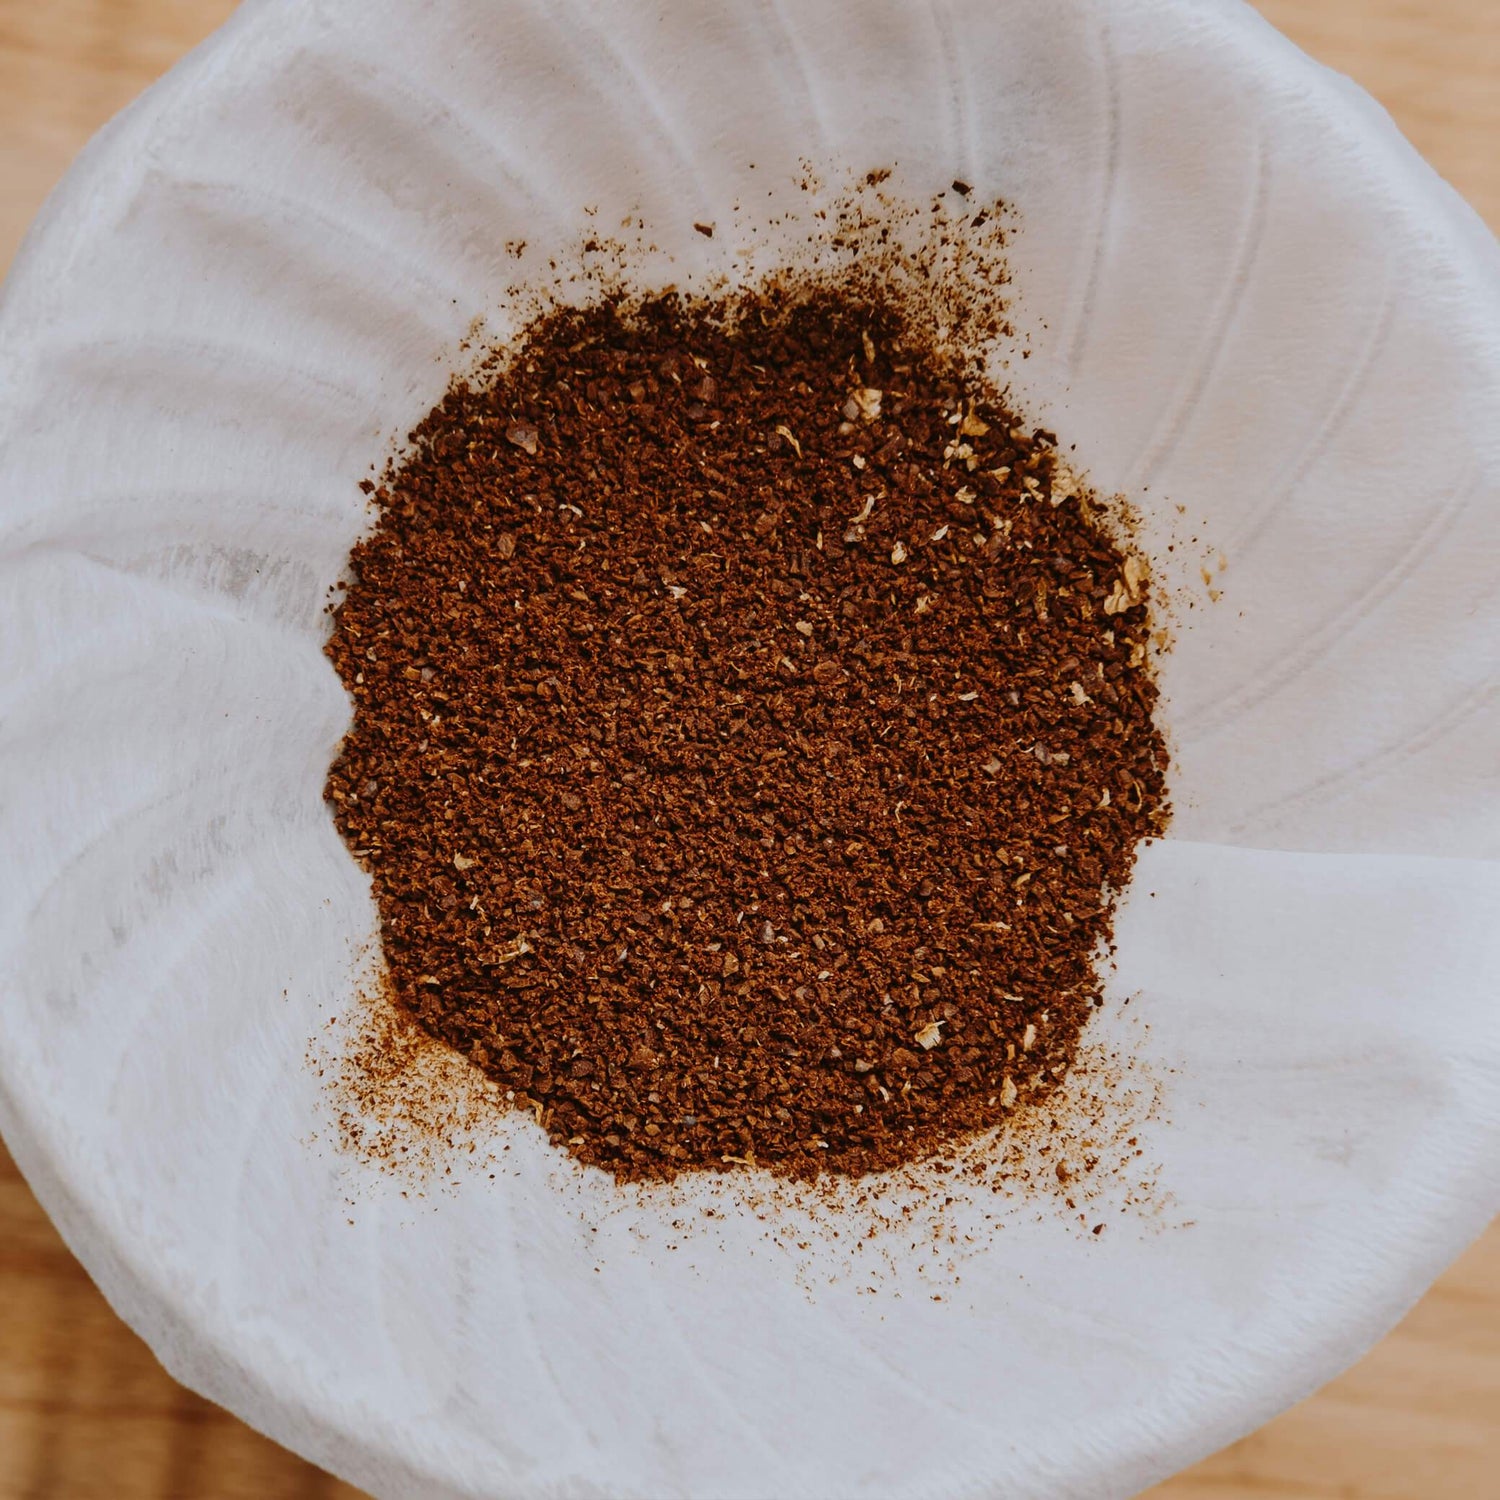 Hario V60 Coffee Filters being used with V60